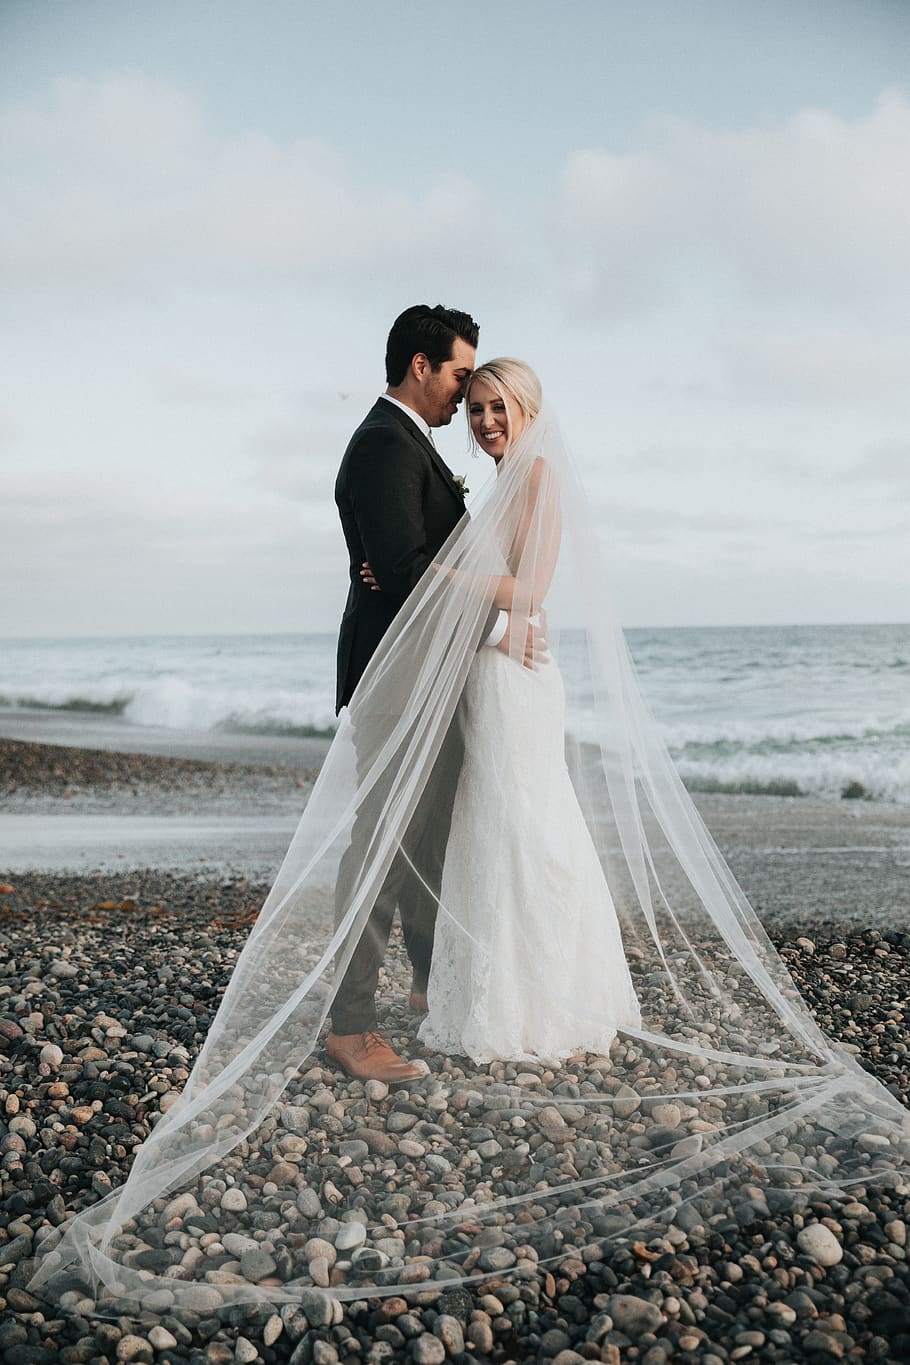 newly wedded couple standing on shore during daytime, person